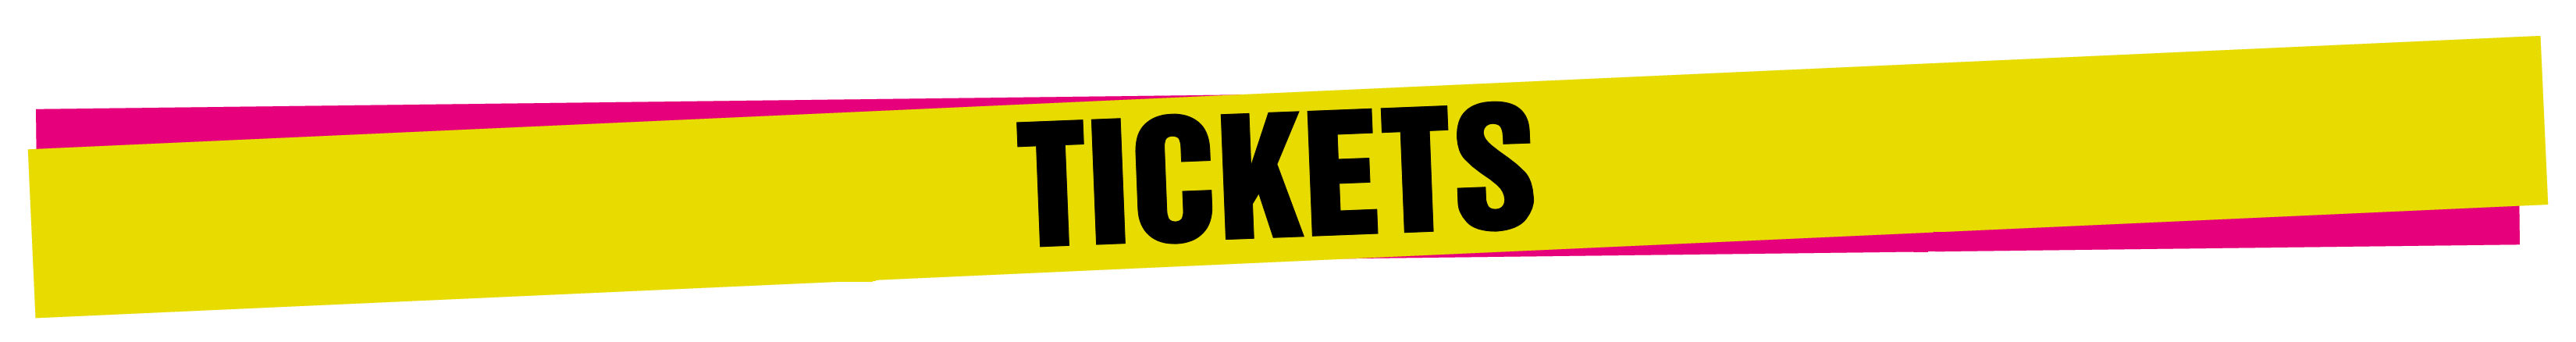 tickets image